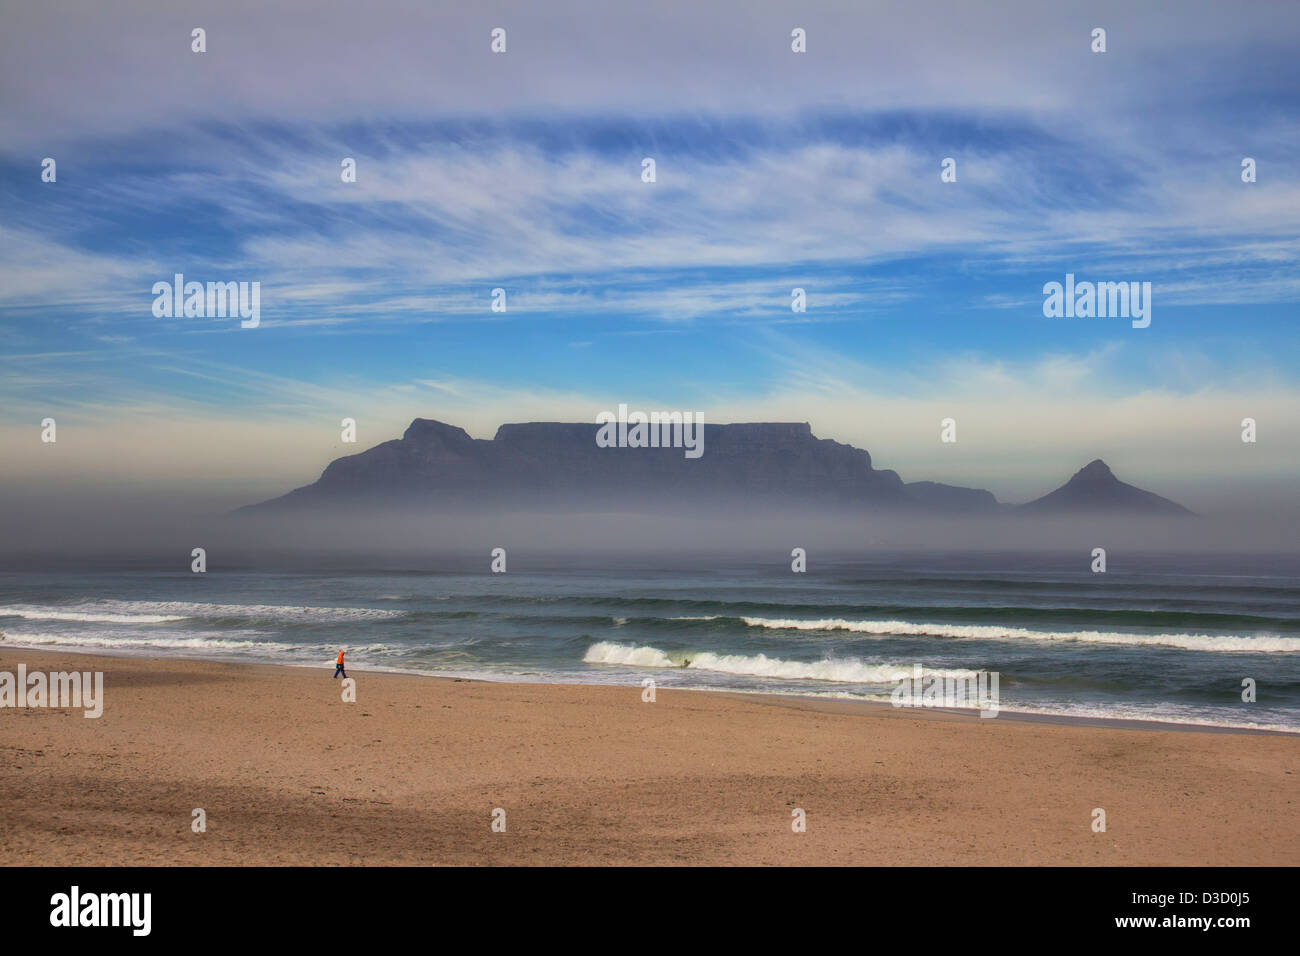 View of famous Table Mountain in Cape Town, South Africa Stock Photo